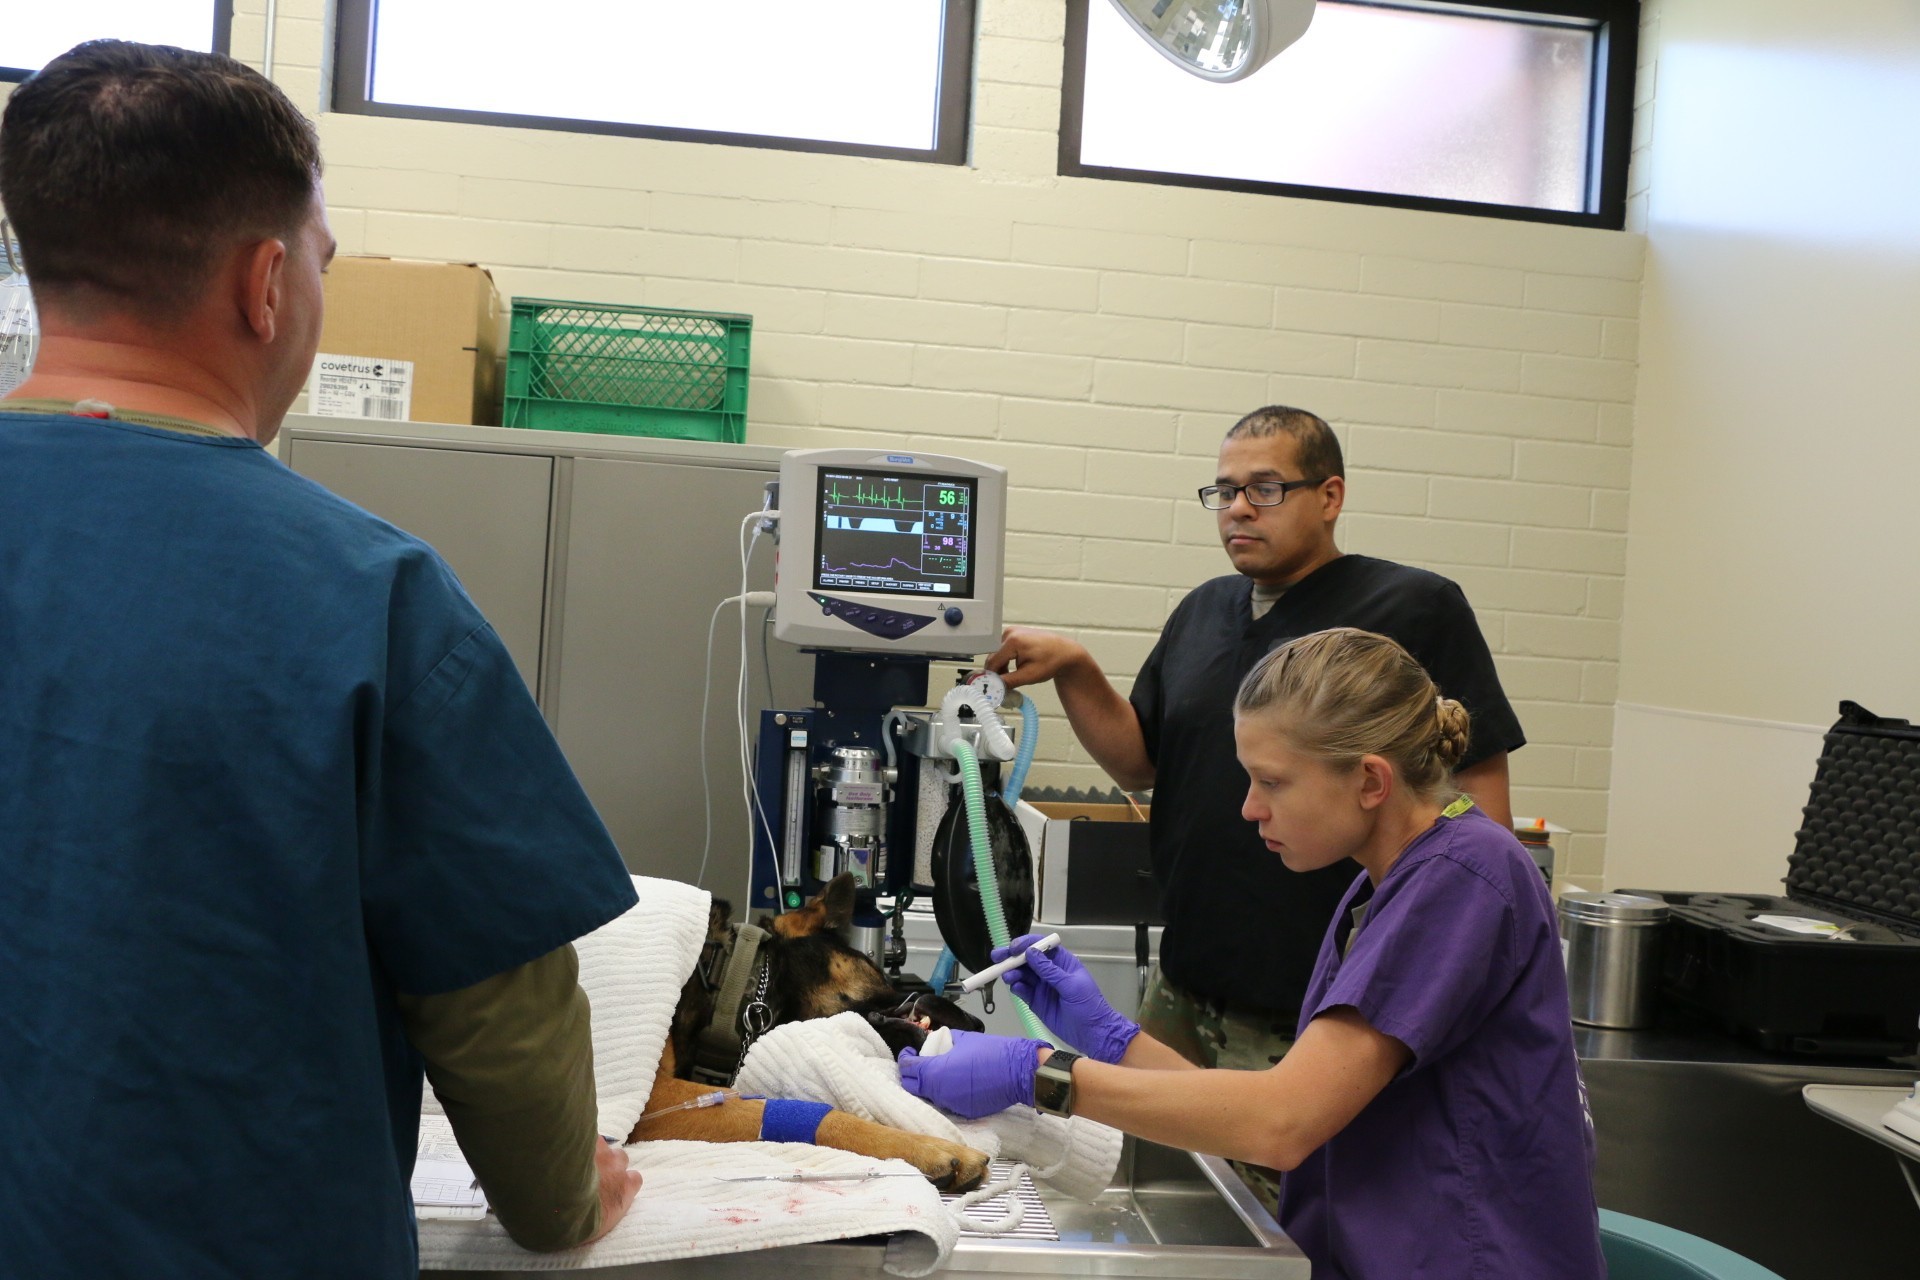 MWDs visit vet for dental wellness | Article | The United States Army